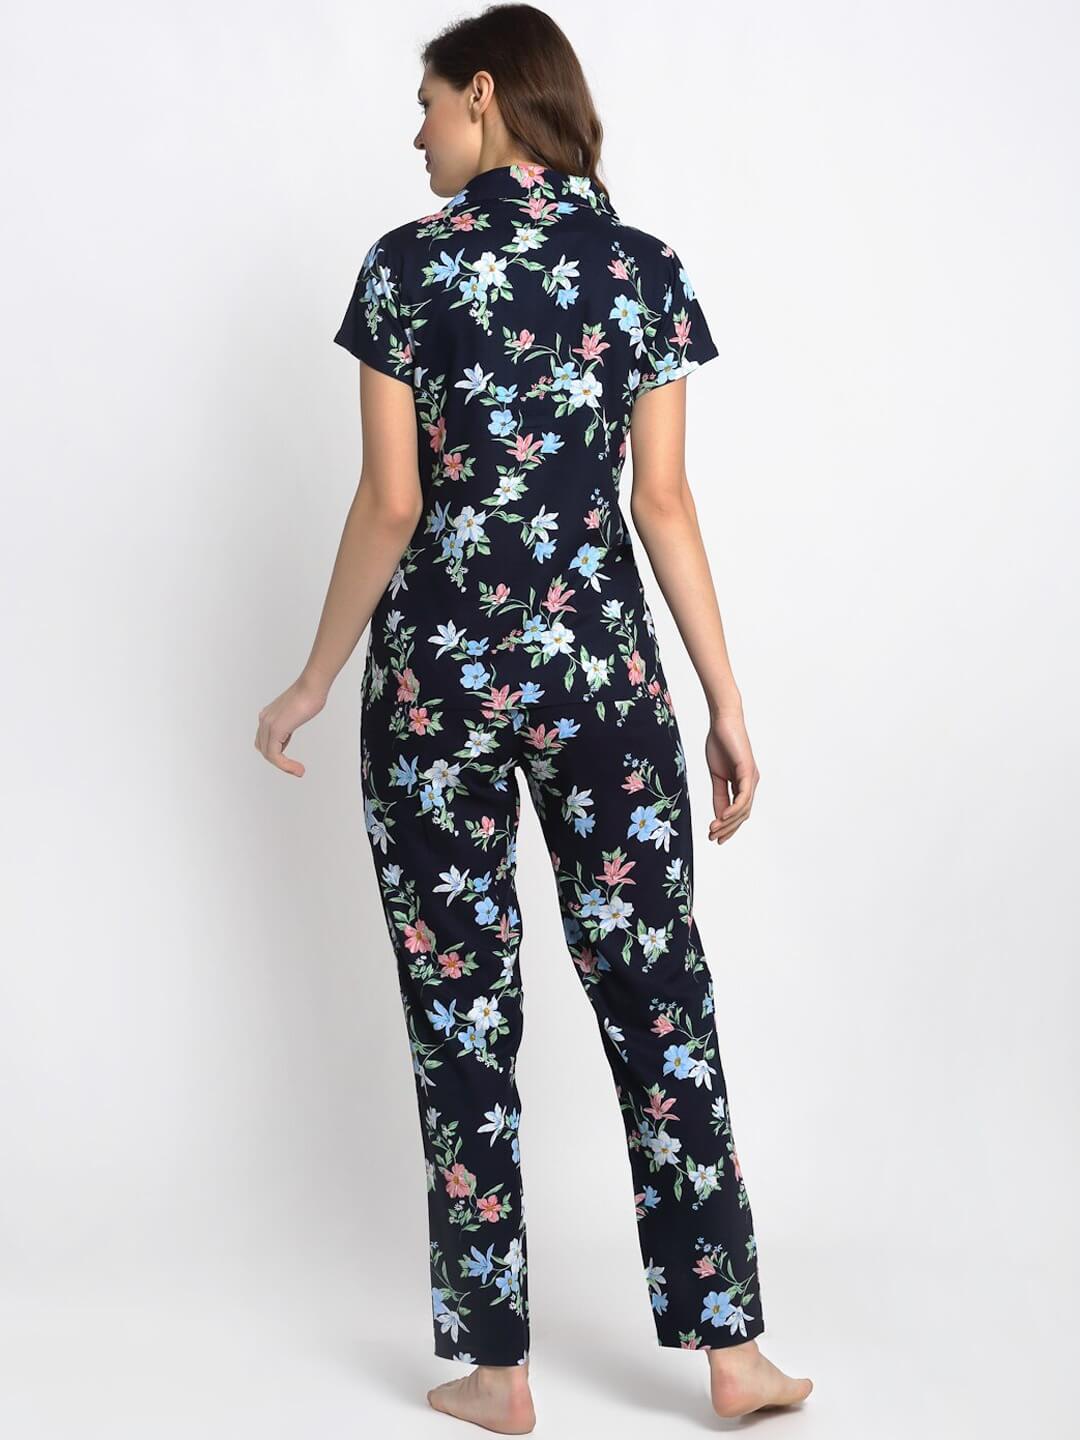 Navy Color Floral Printed Cotton Nightsuit For Women Claura Designs Pvt. Ltd. Nightsuit Floral, Navy Blue, Nightsuit, Rayon, Sleepwear